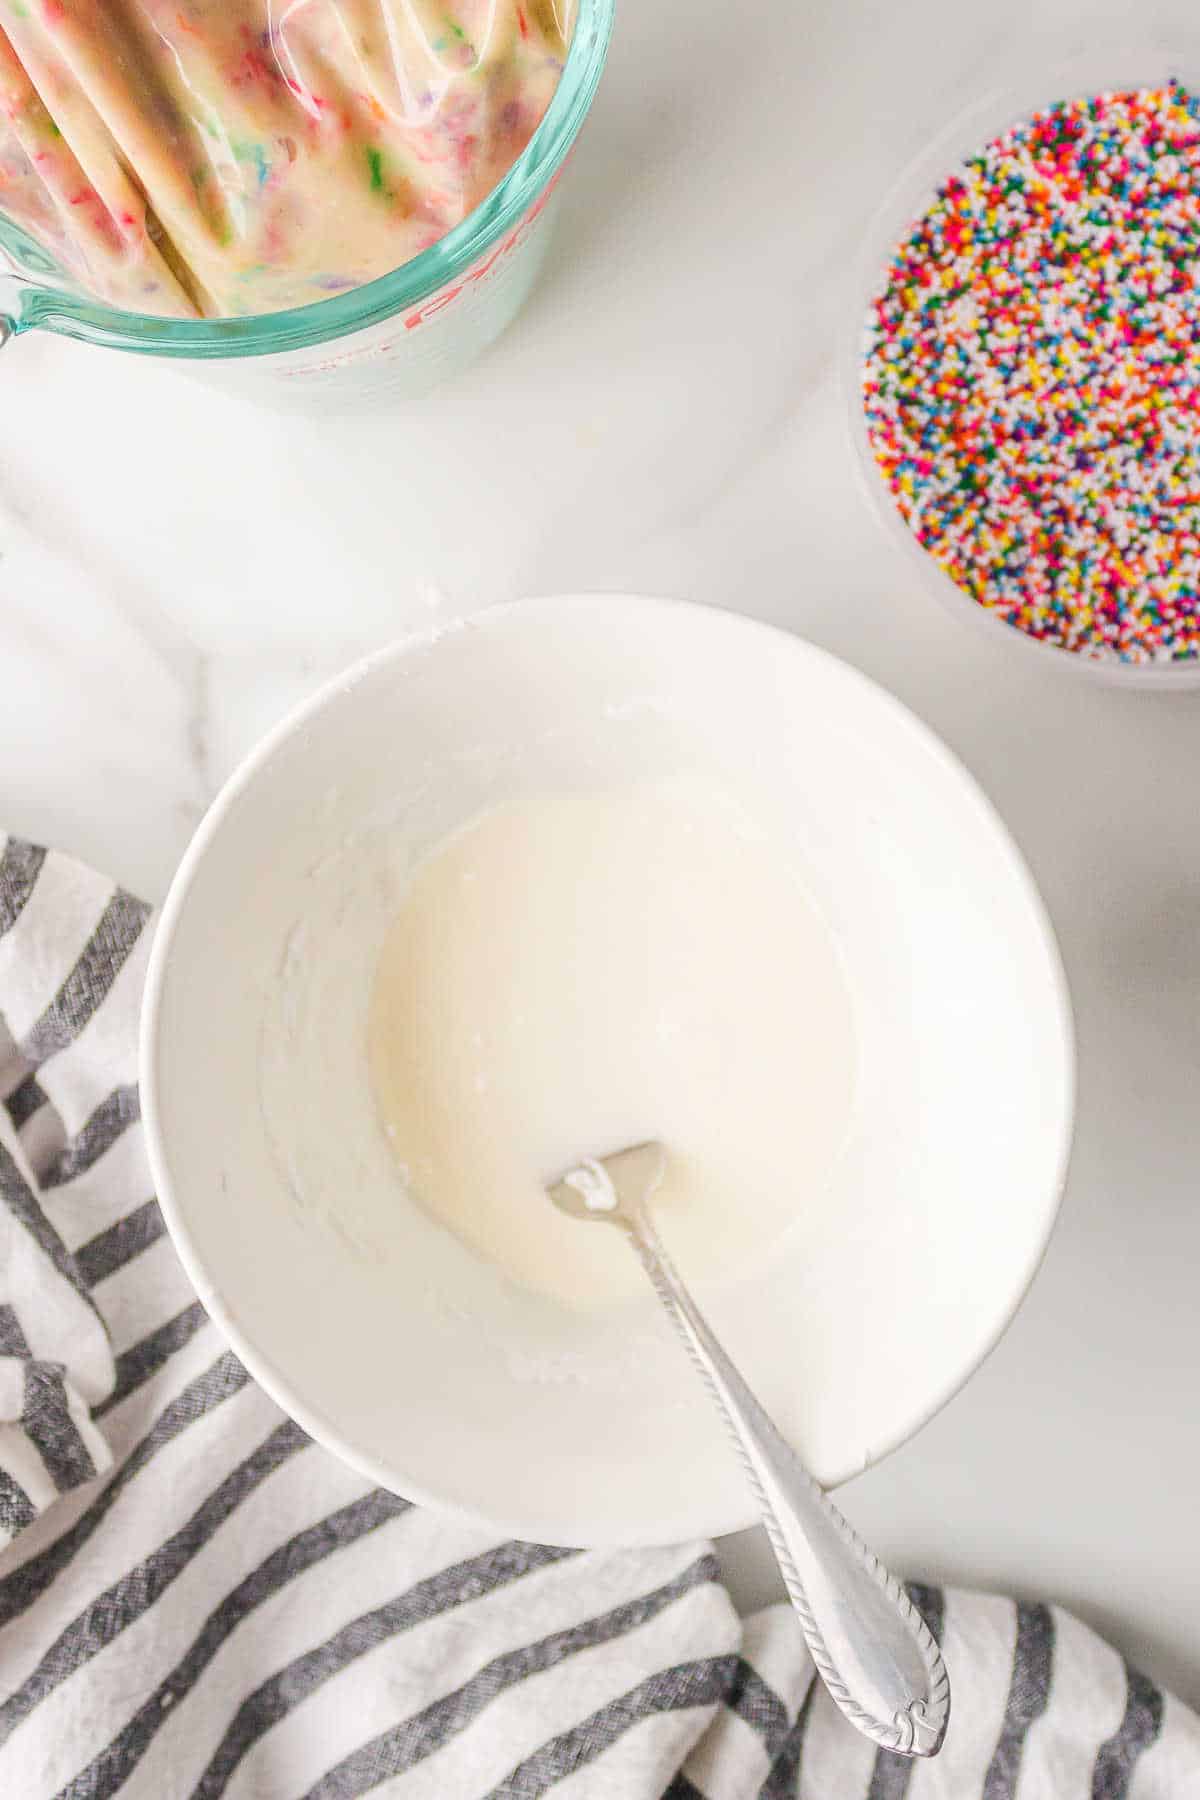 Donut glaze in a mixing bowl next to a dish of sprinkles. 